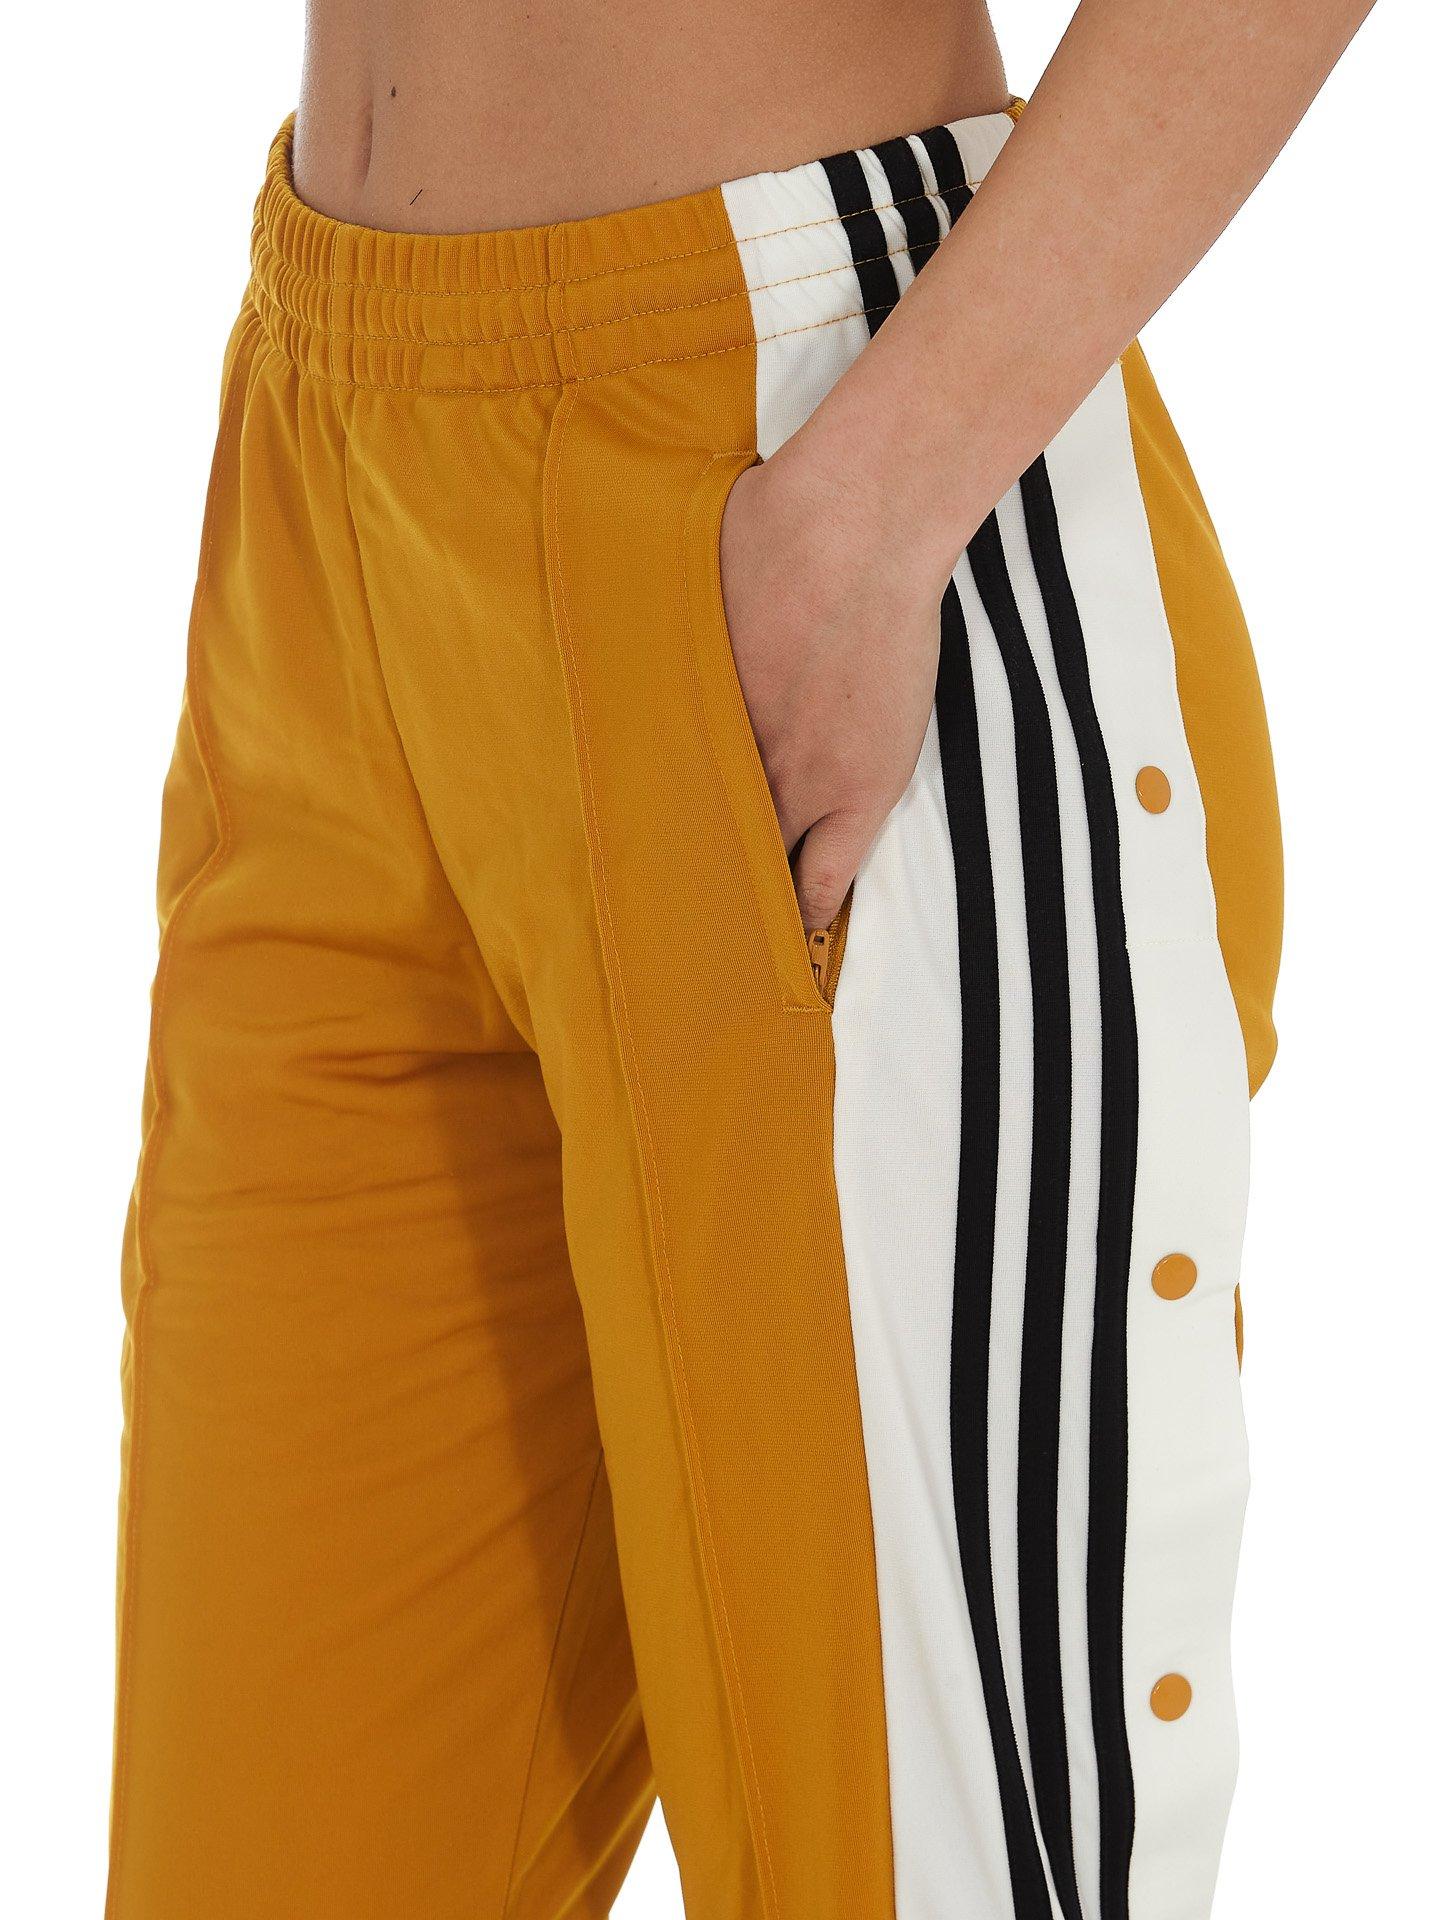 adidas Originals Girls Are Awesome Adibreak Pants in Yellow | Lyst